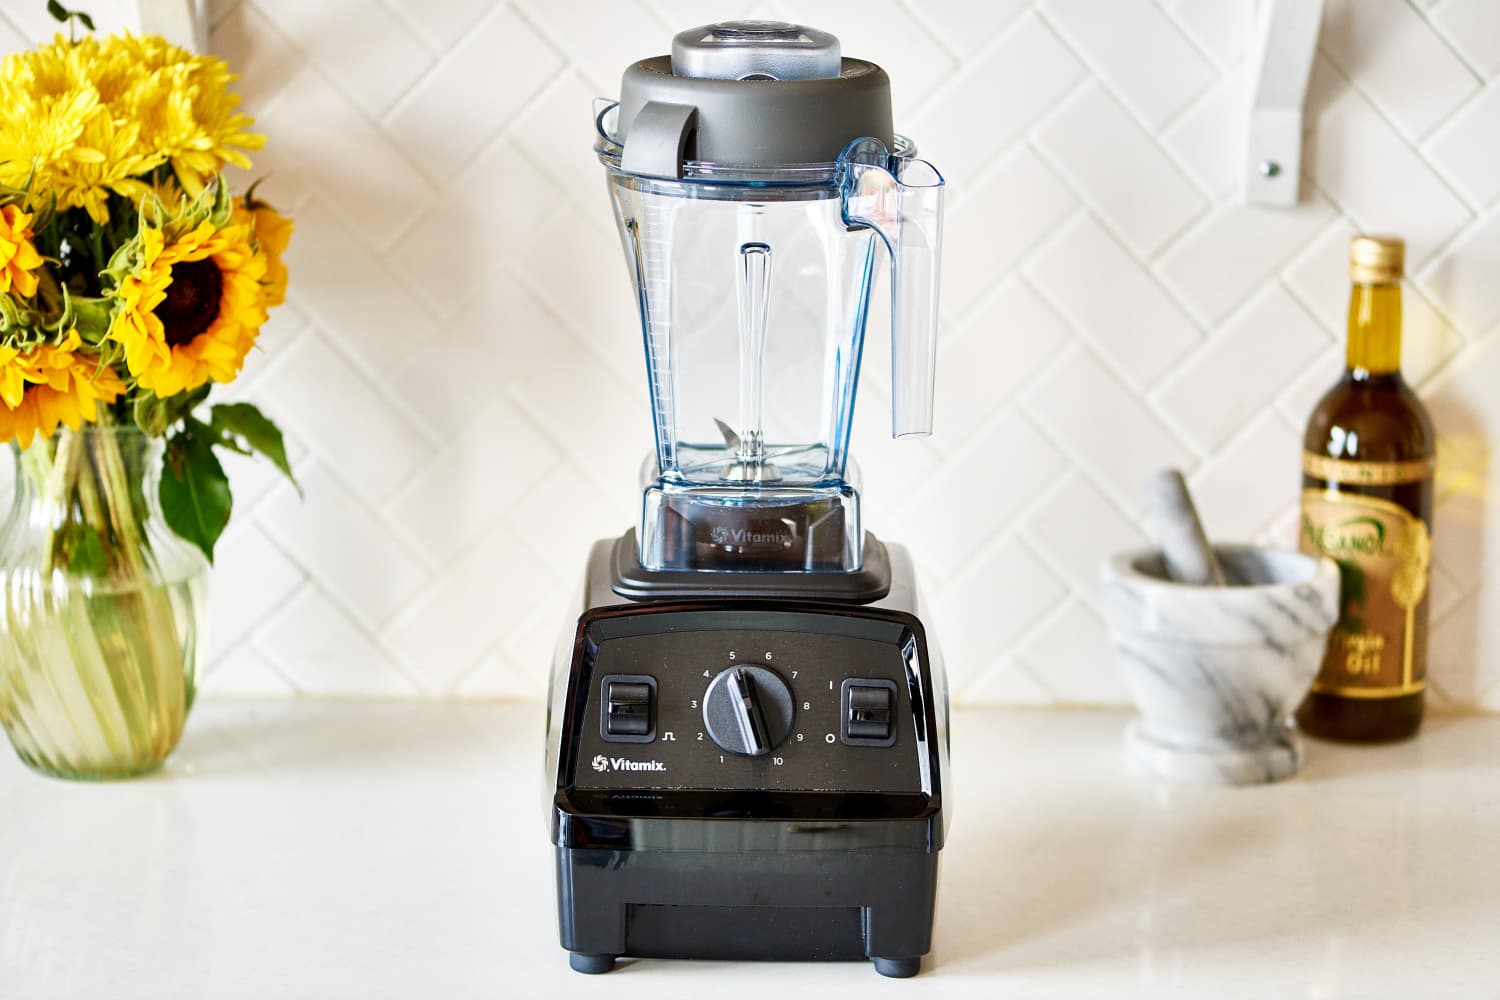 Vitamix Sale: Up to 50% Off Blenders and More for 2 Days Only